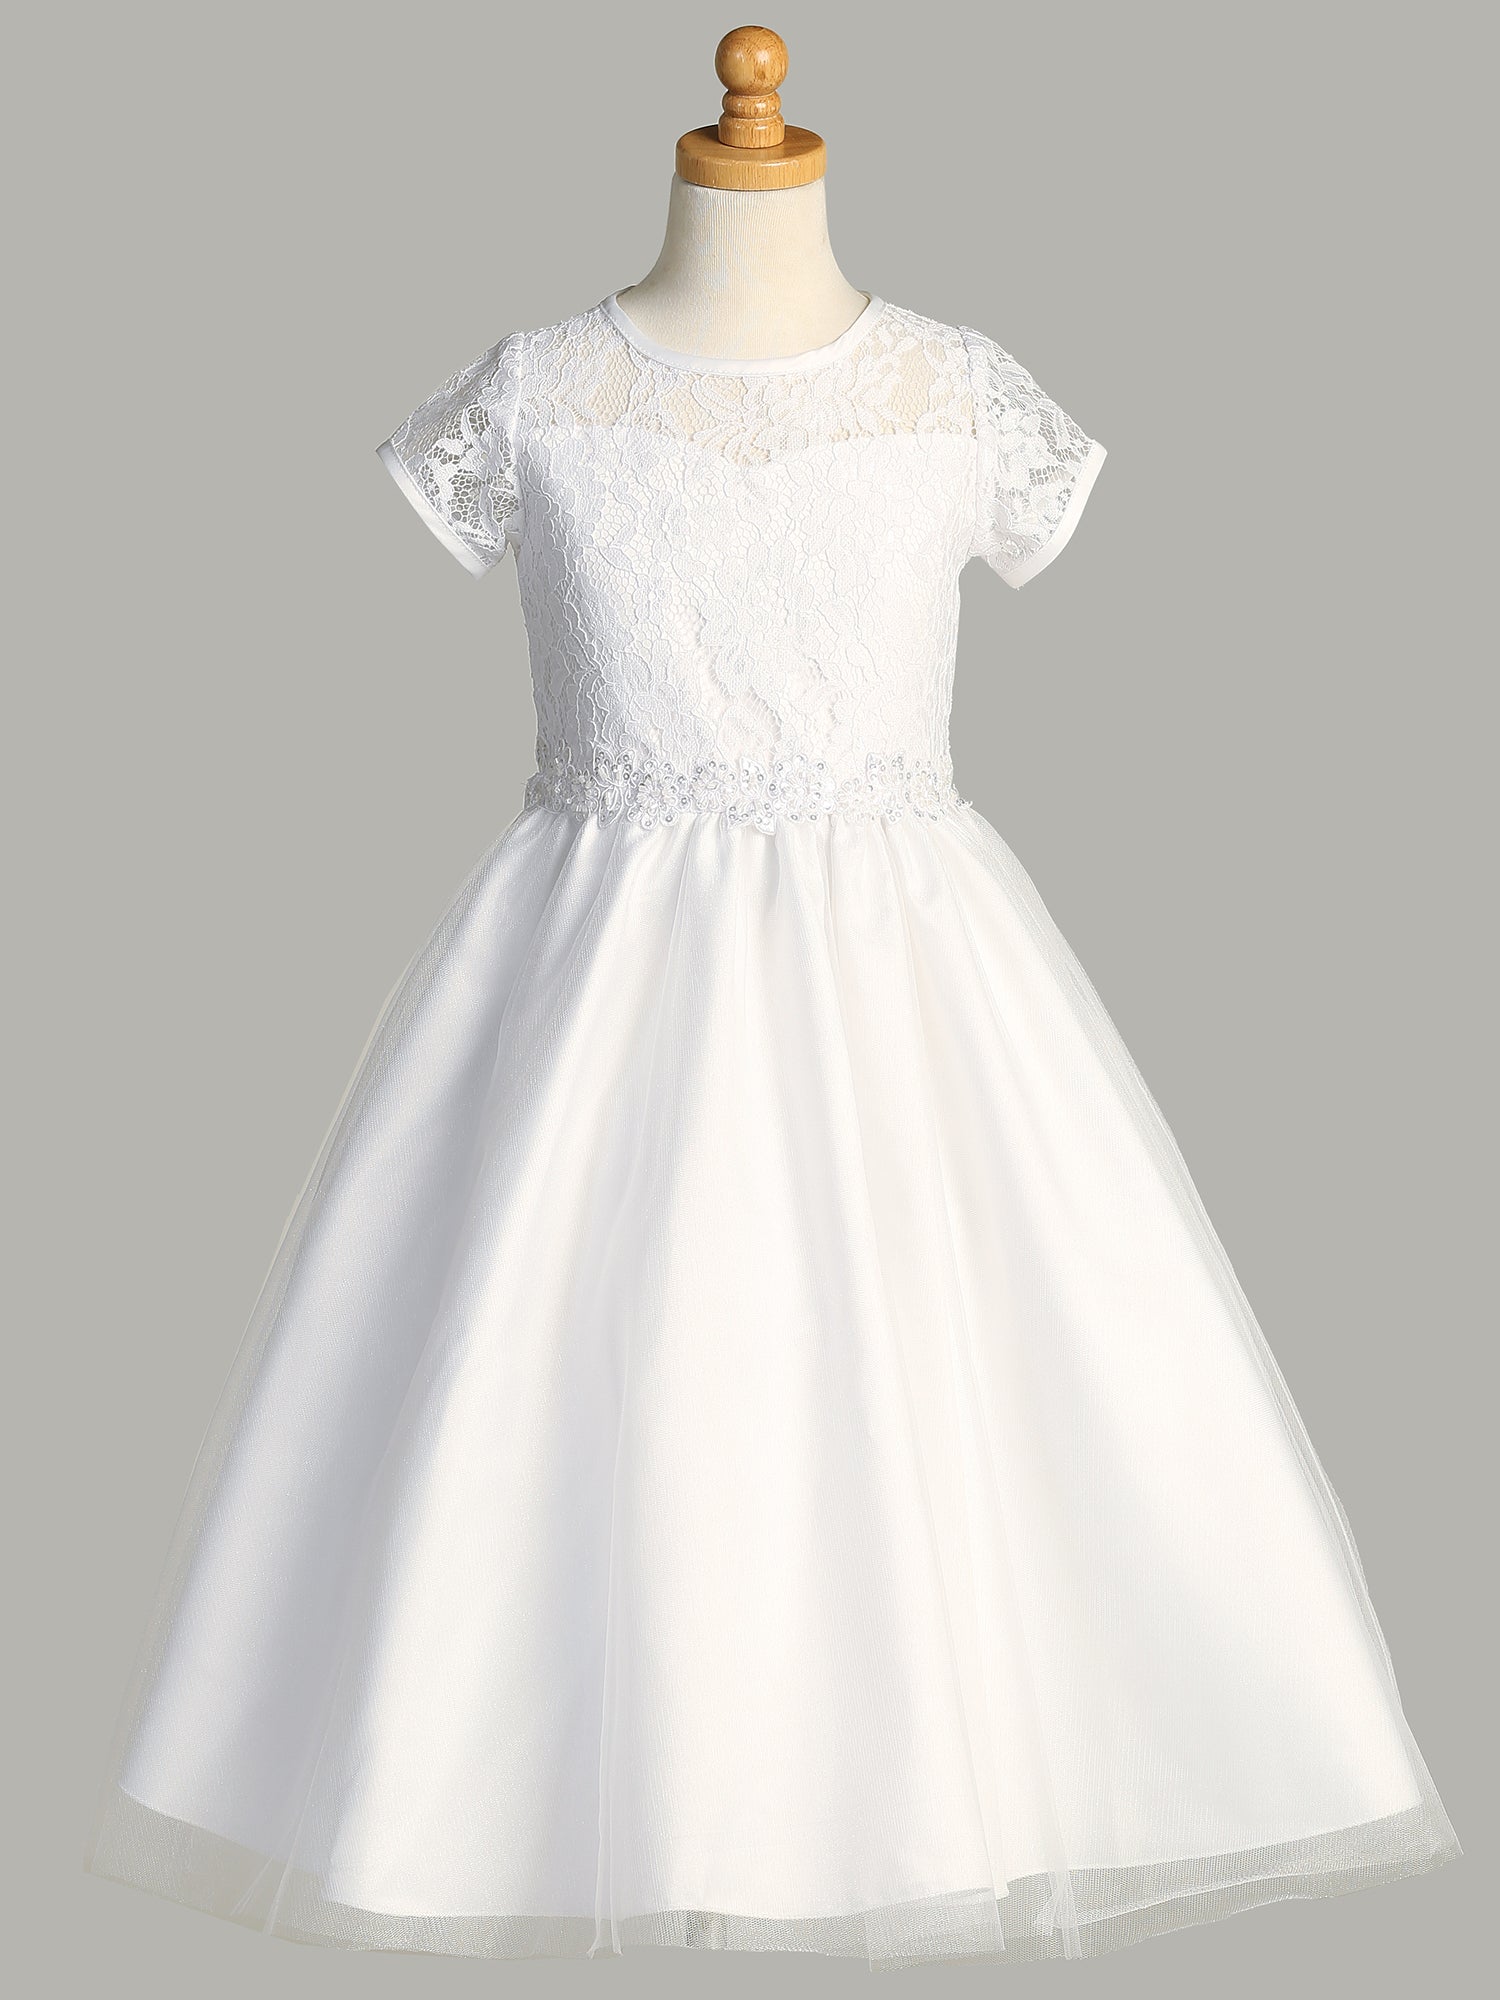 A side view of the First Communion Dress showing the tulle hard net for extra skirt volume and the tea-length of the dress.